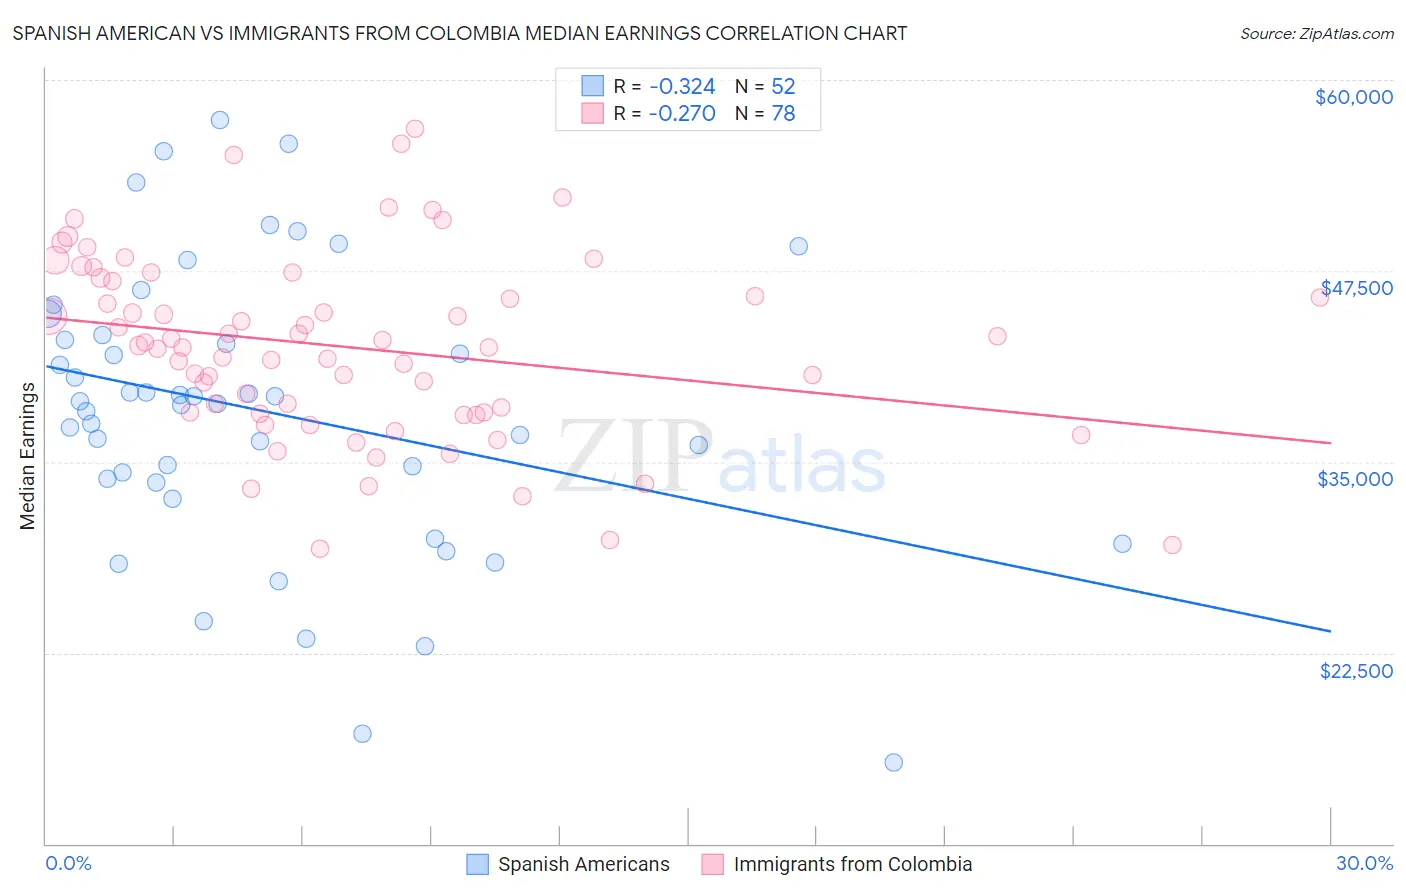 Spanish American vs Immigrants from Colombia Median Earnings